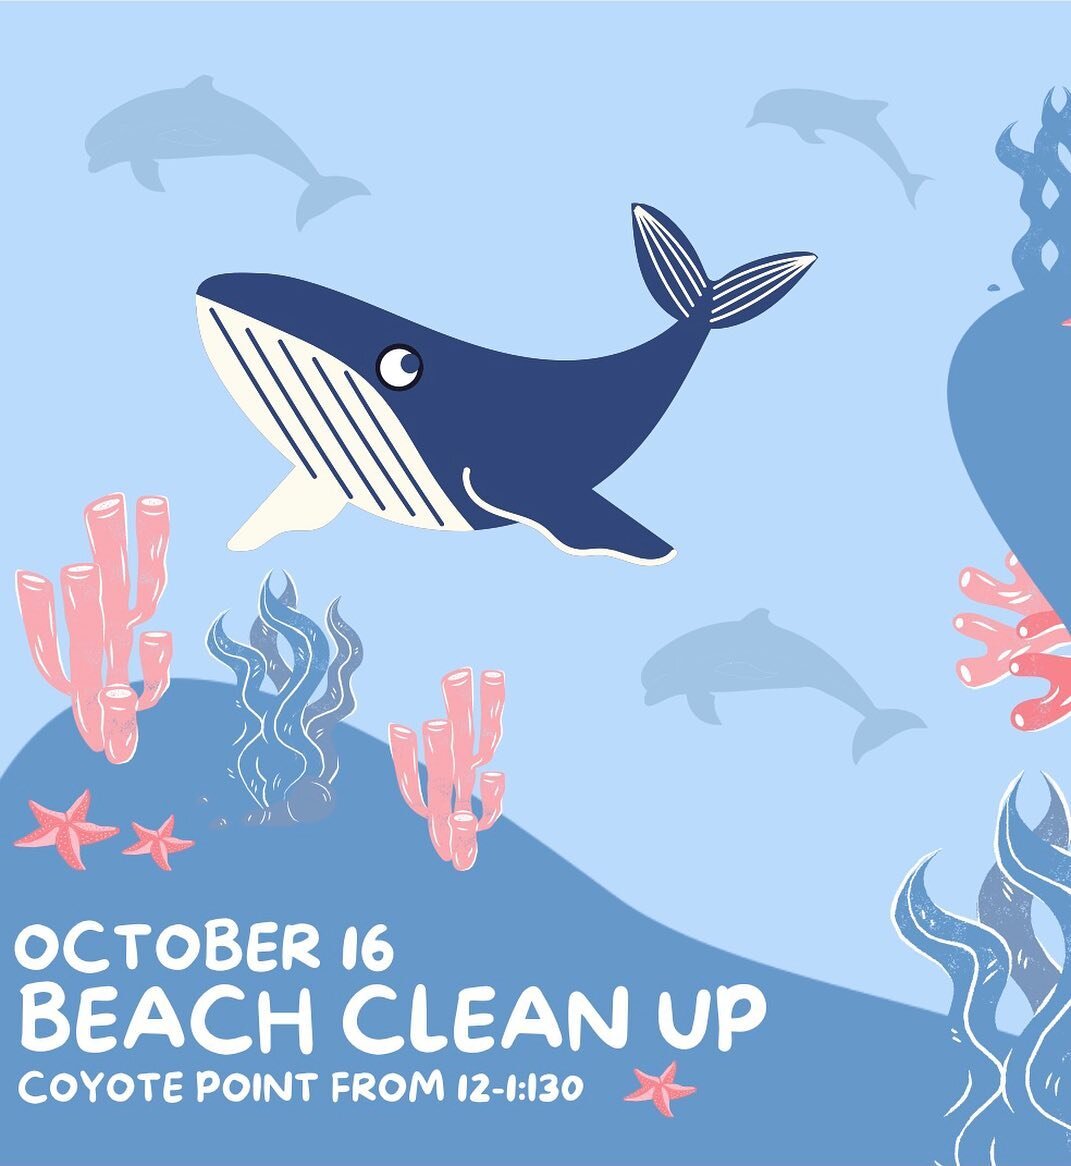 Help us protect our oceans! We are hosting a beach clean up tomorrow from 12-1:30 at Coyote Point. All materials (including our most essential fuel: donuts) will be provided. Anyone and everyone is welcome and please spread the word!